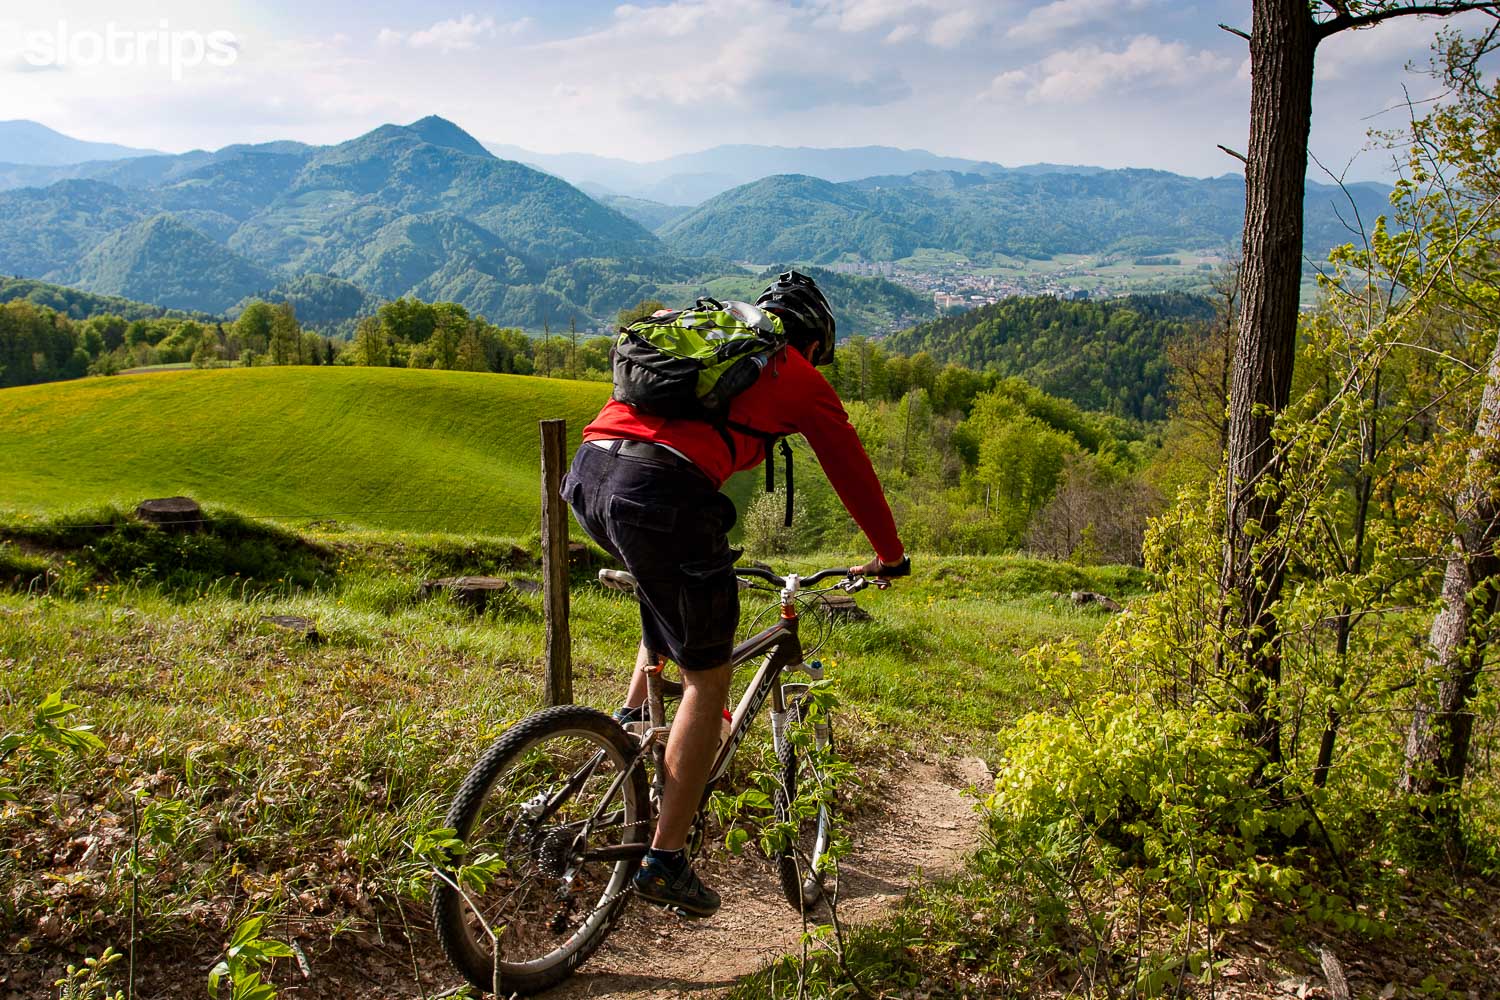 A mountain biker descending on a single track close to Ljubljana, Slovenia with Polhov Gradec Hills in the background